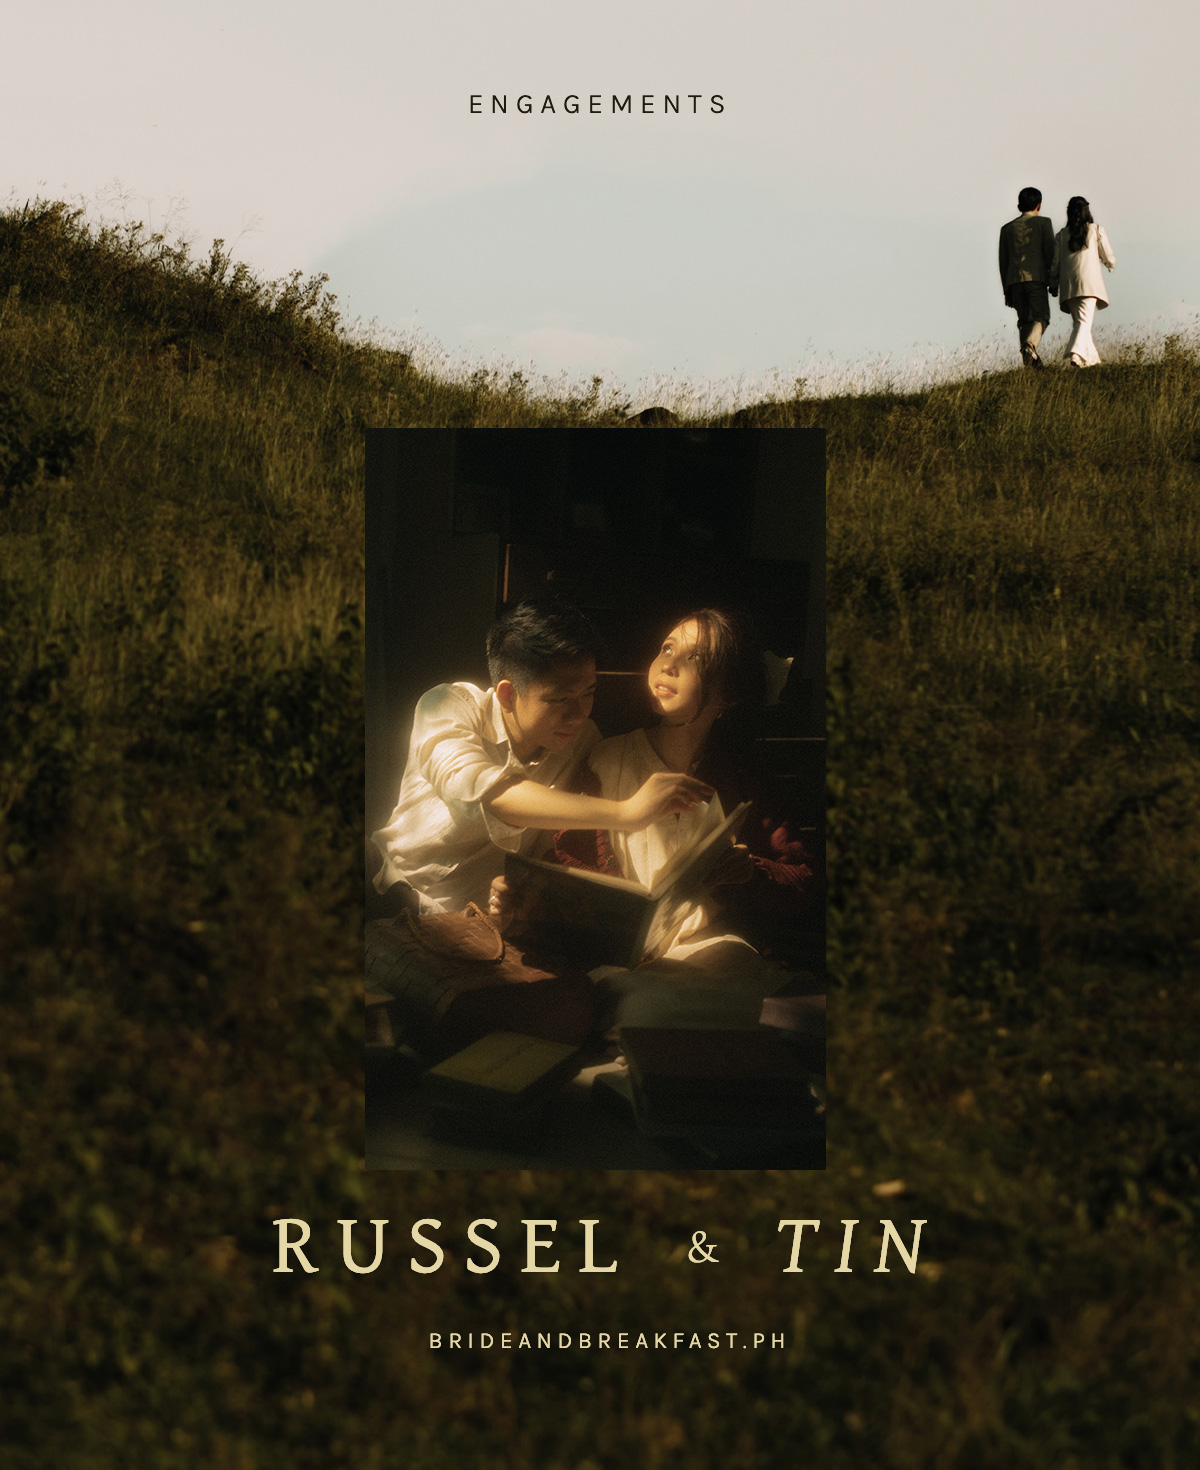 Russel and Tin